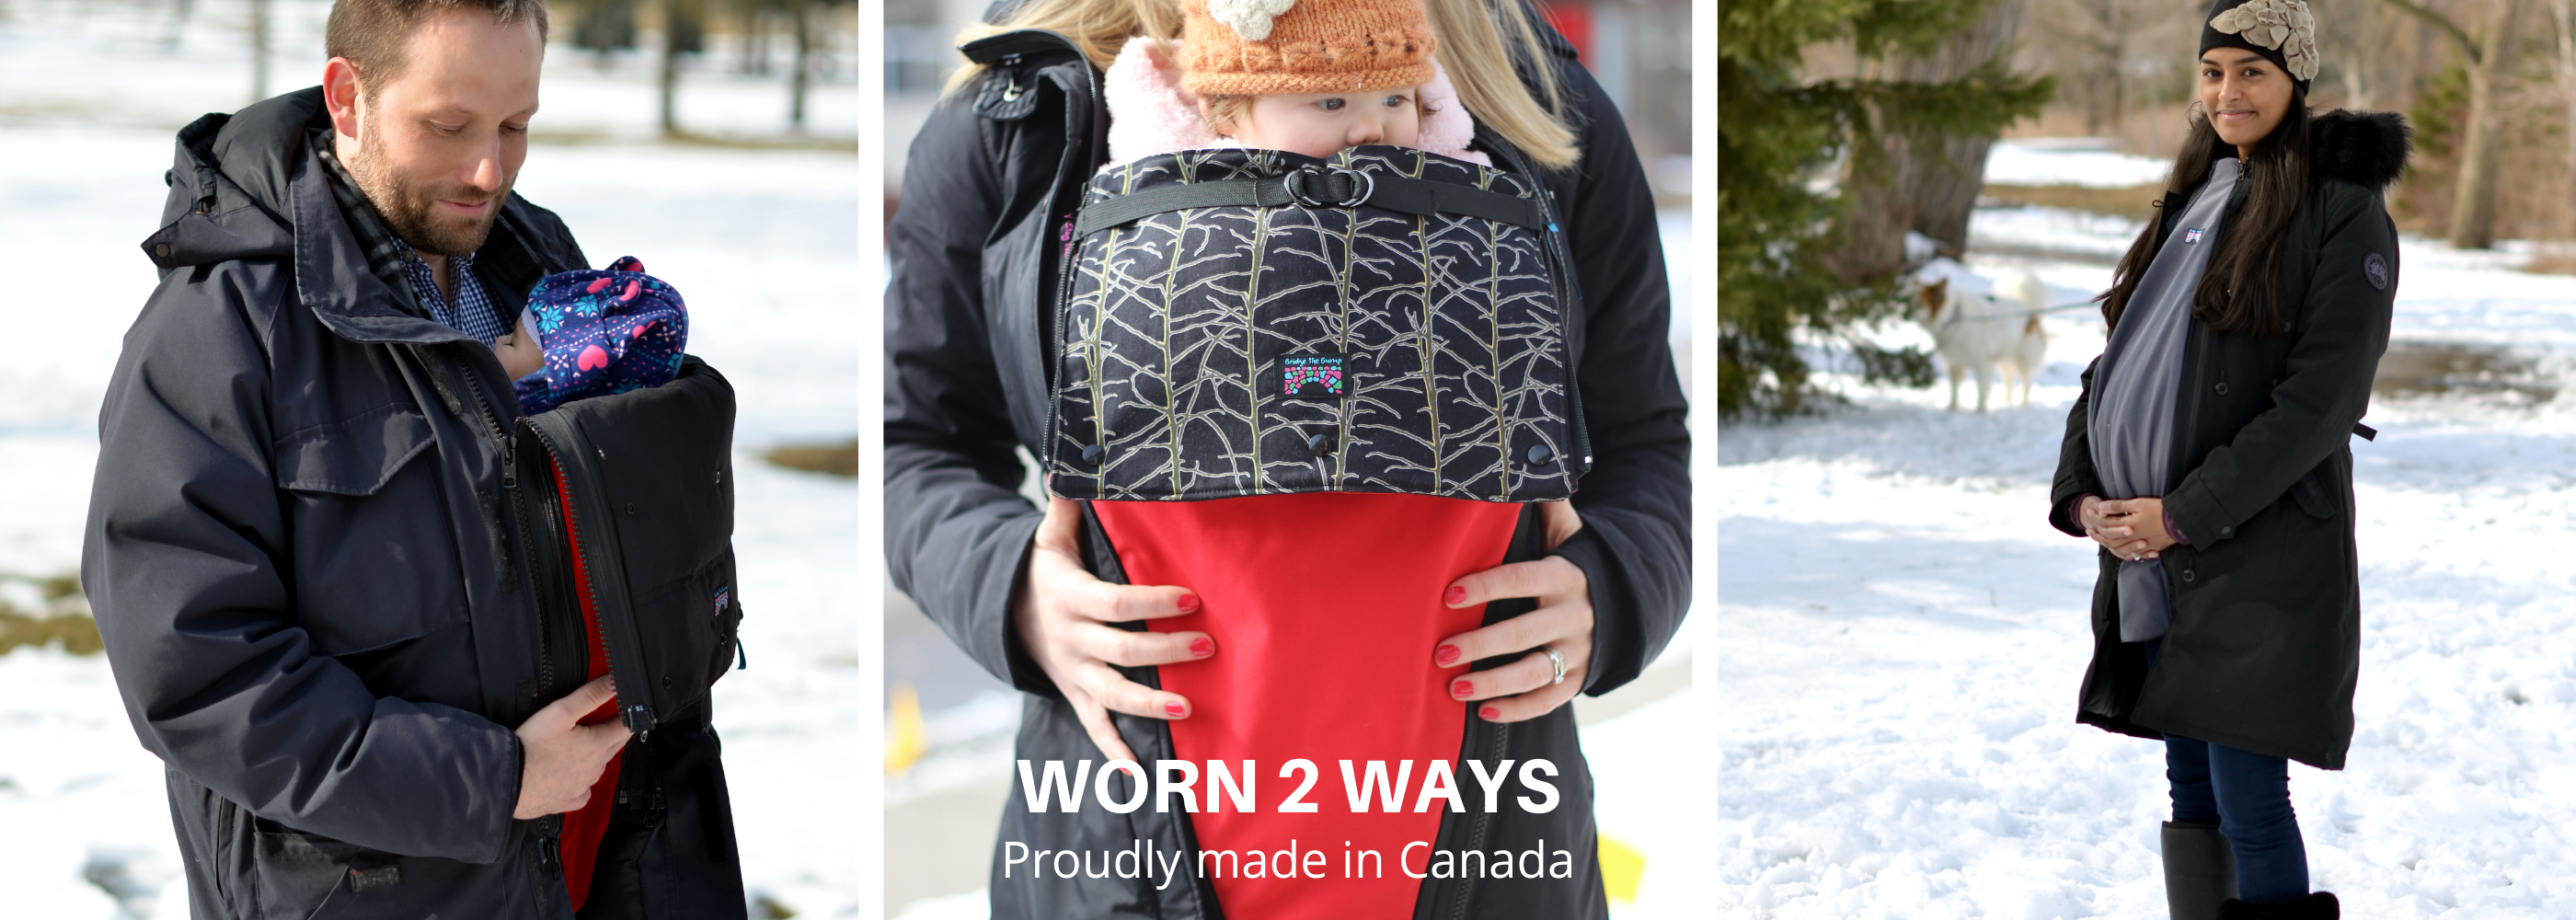 Winter Coat Extensions for Pregnancy and Babywearing – Bridge the Bump Inc.